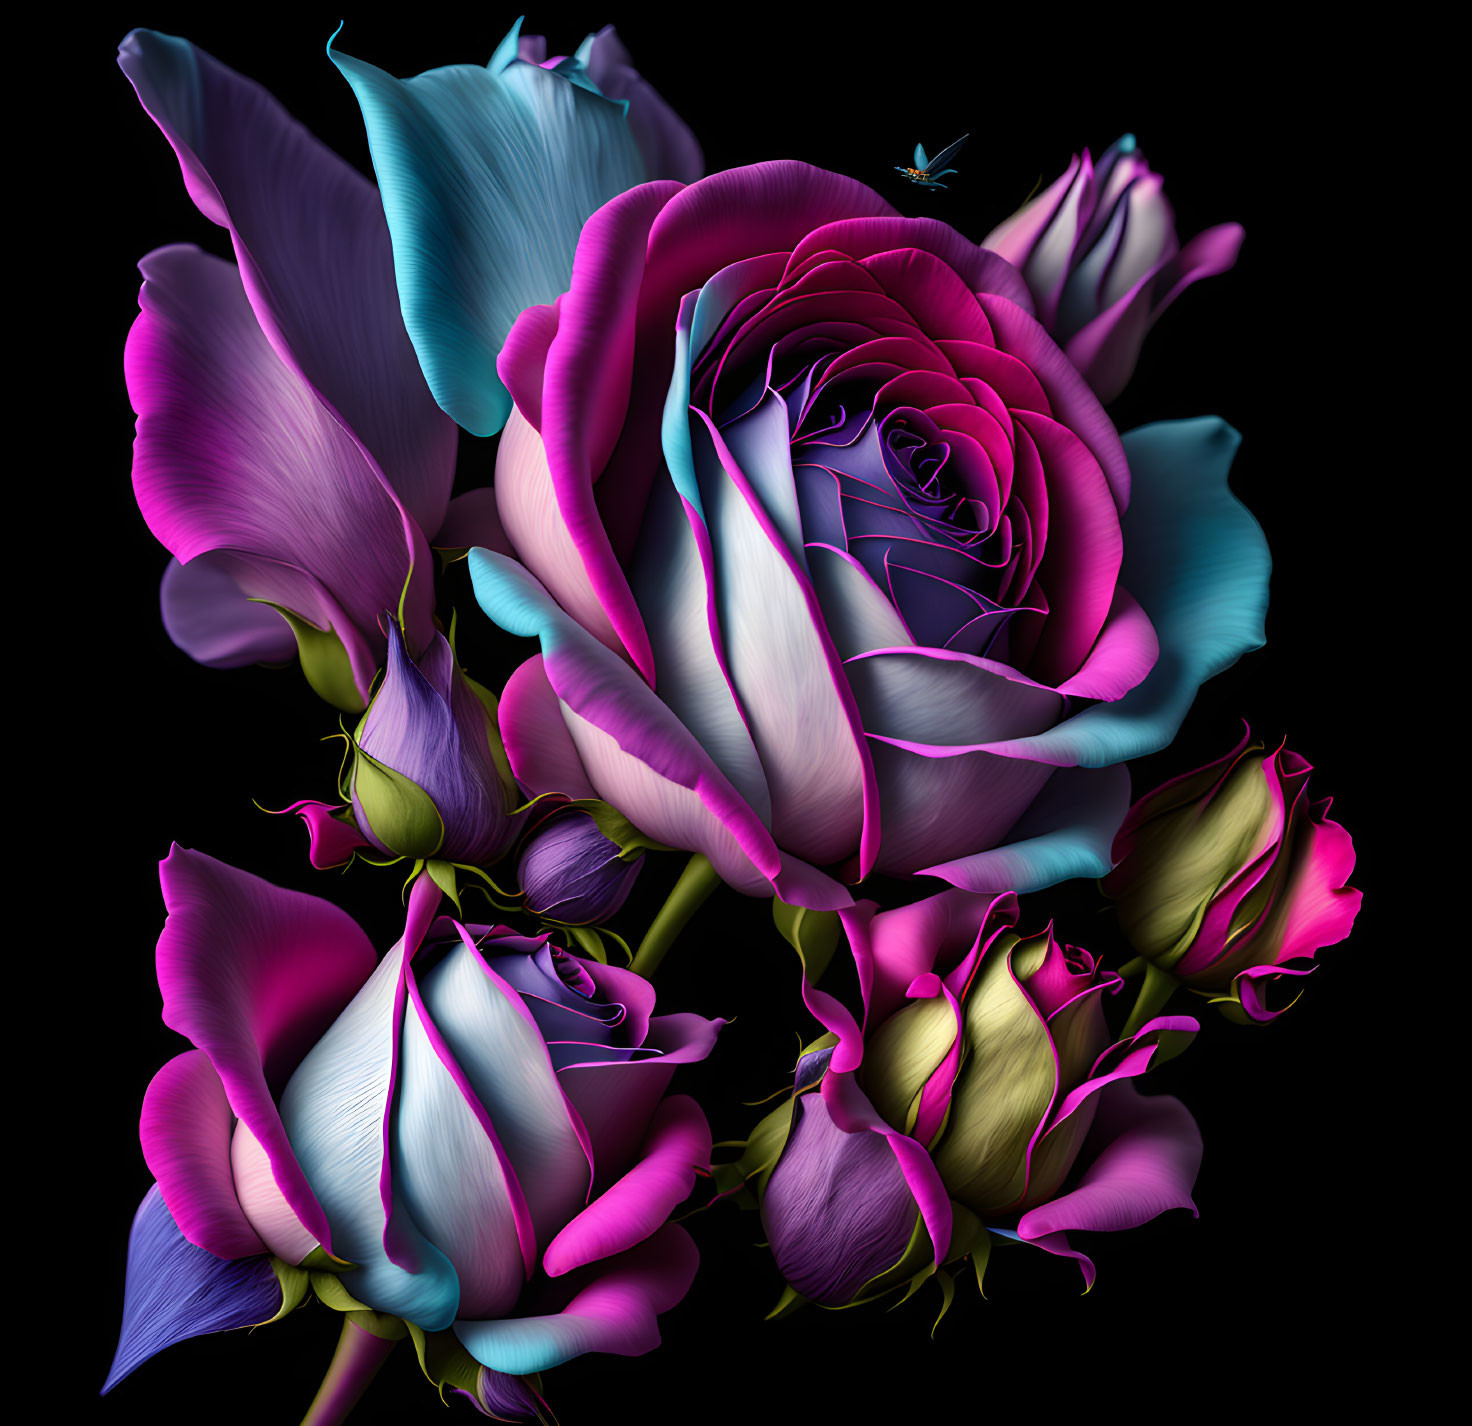 Multicolored Rose Bouquet with Gradient Petals on Dark Background